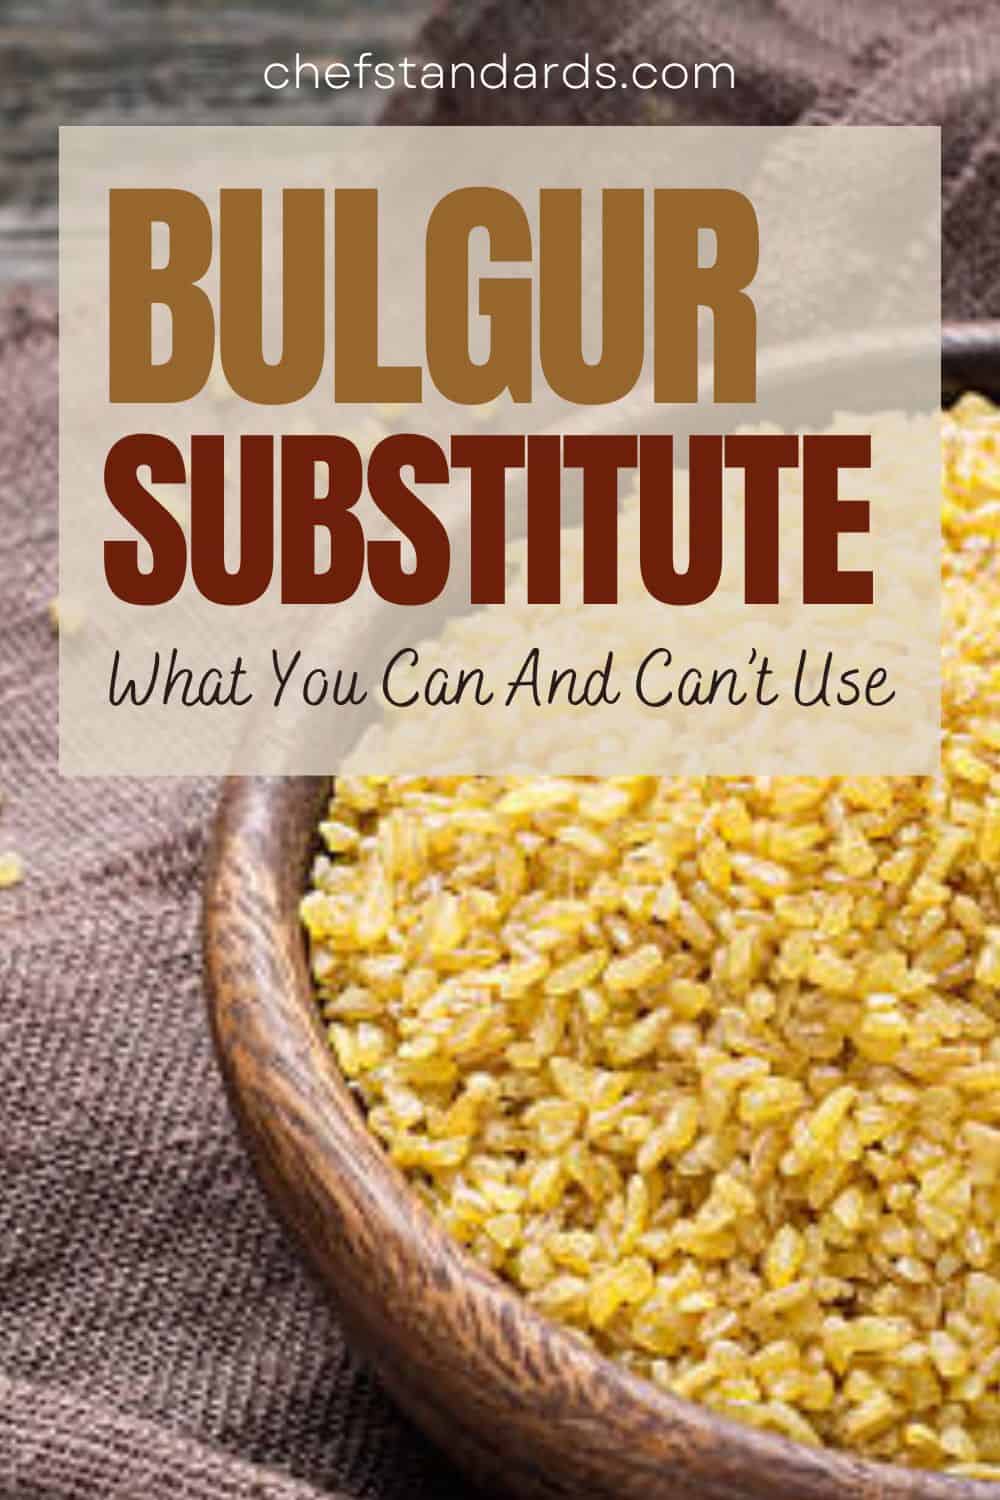 20 Bulgur Substitutes That Are Just As Healthy (Or Even Healthier)